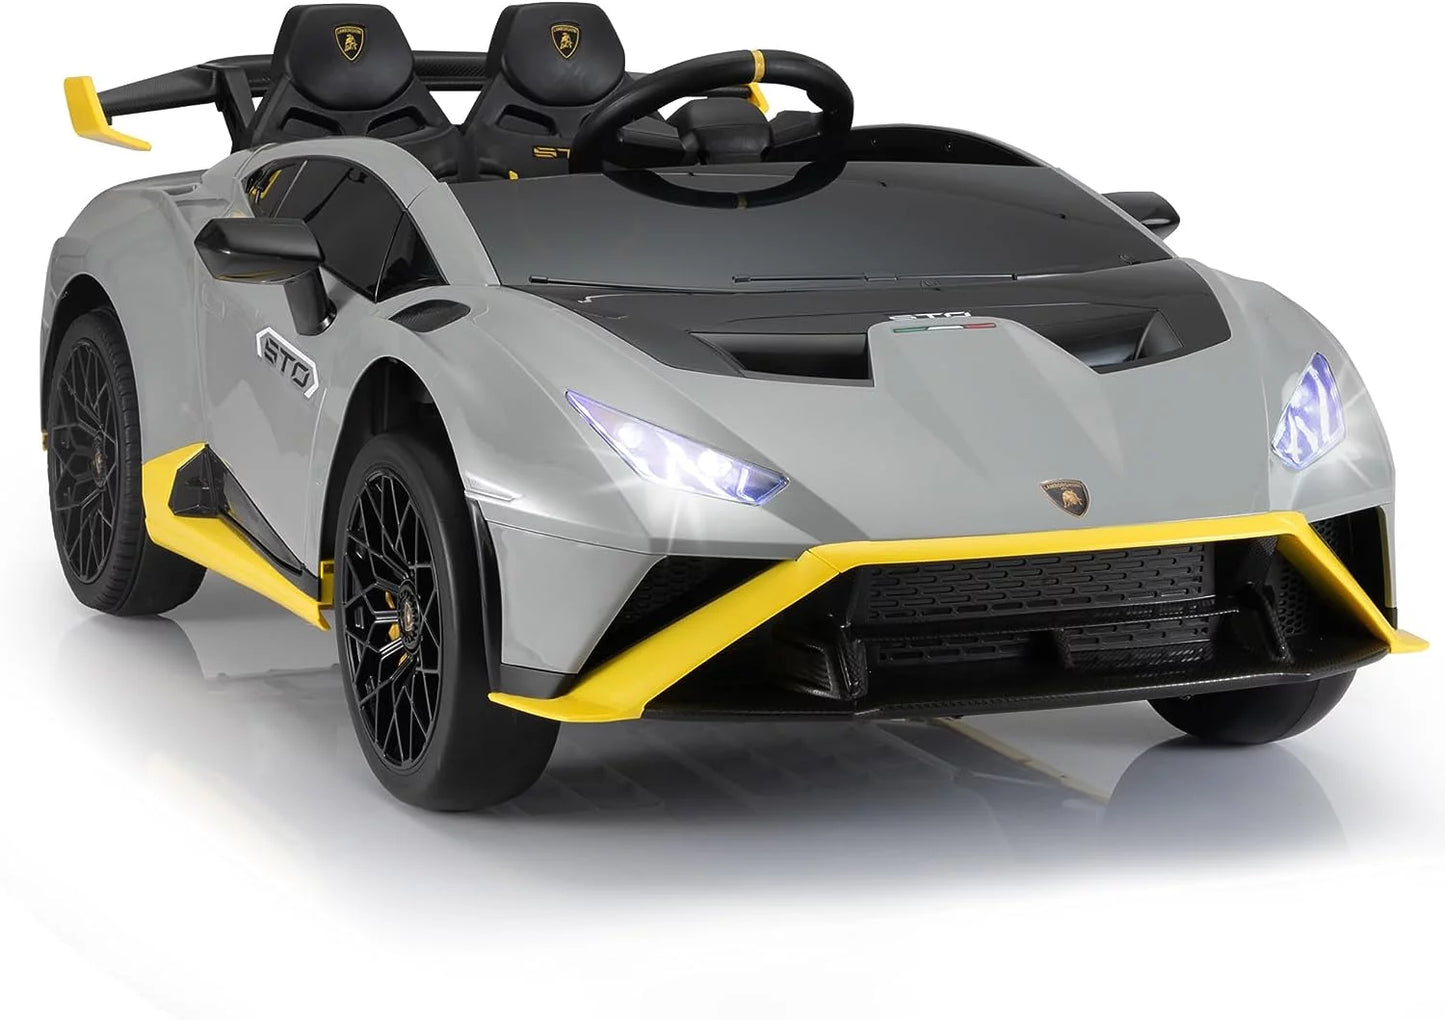 Lamborghini Huracan STO 12V With drift mode Kids Ride On Car with a parental controller - Grey